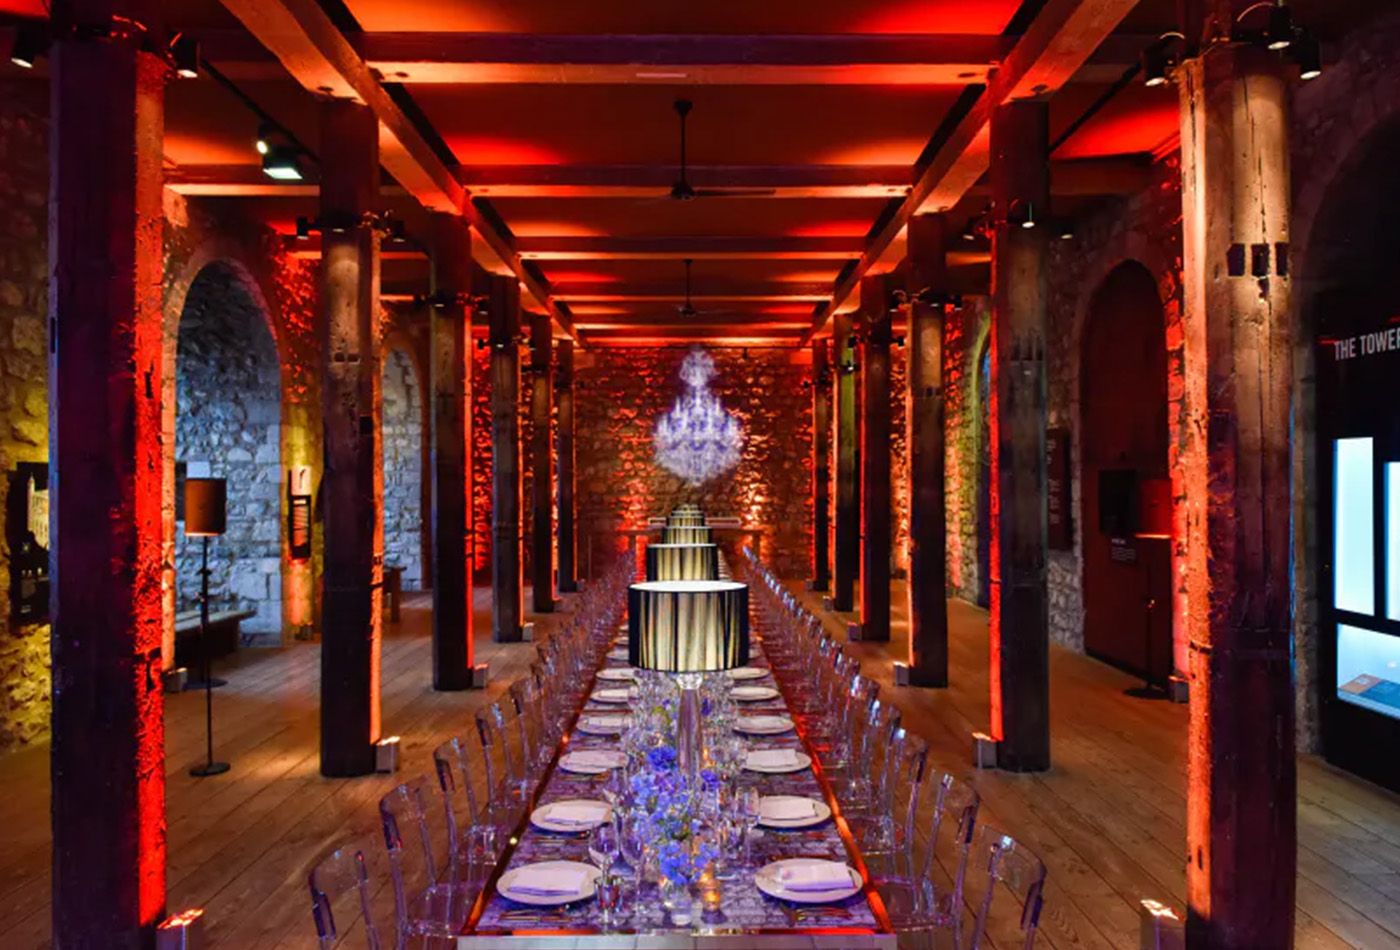 Grand dining space with brick walls lit up in red and long dining tables with transparent chairs